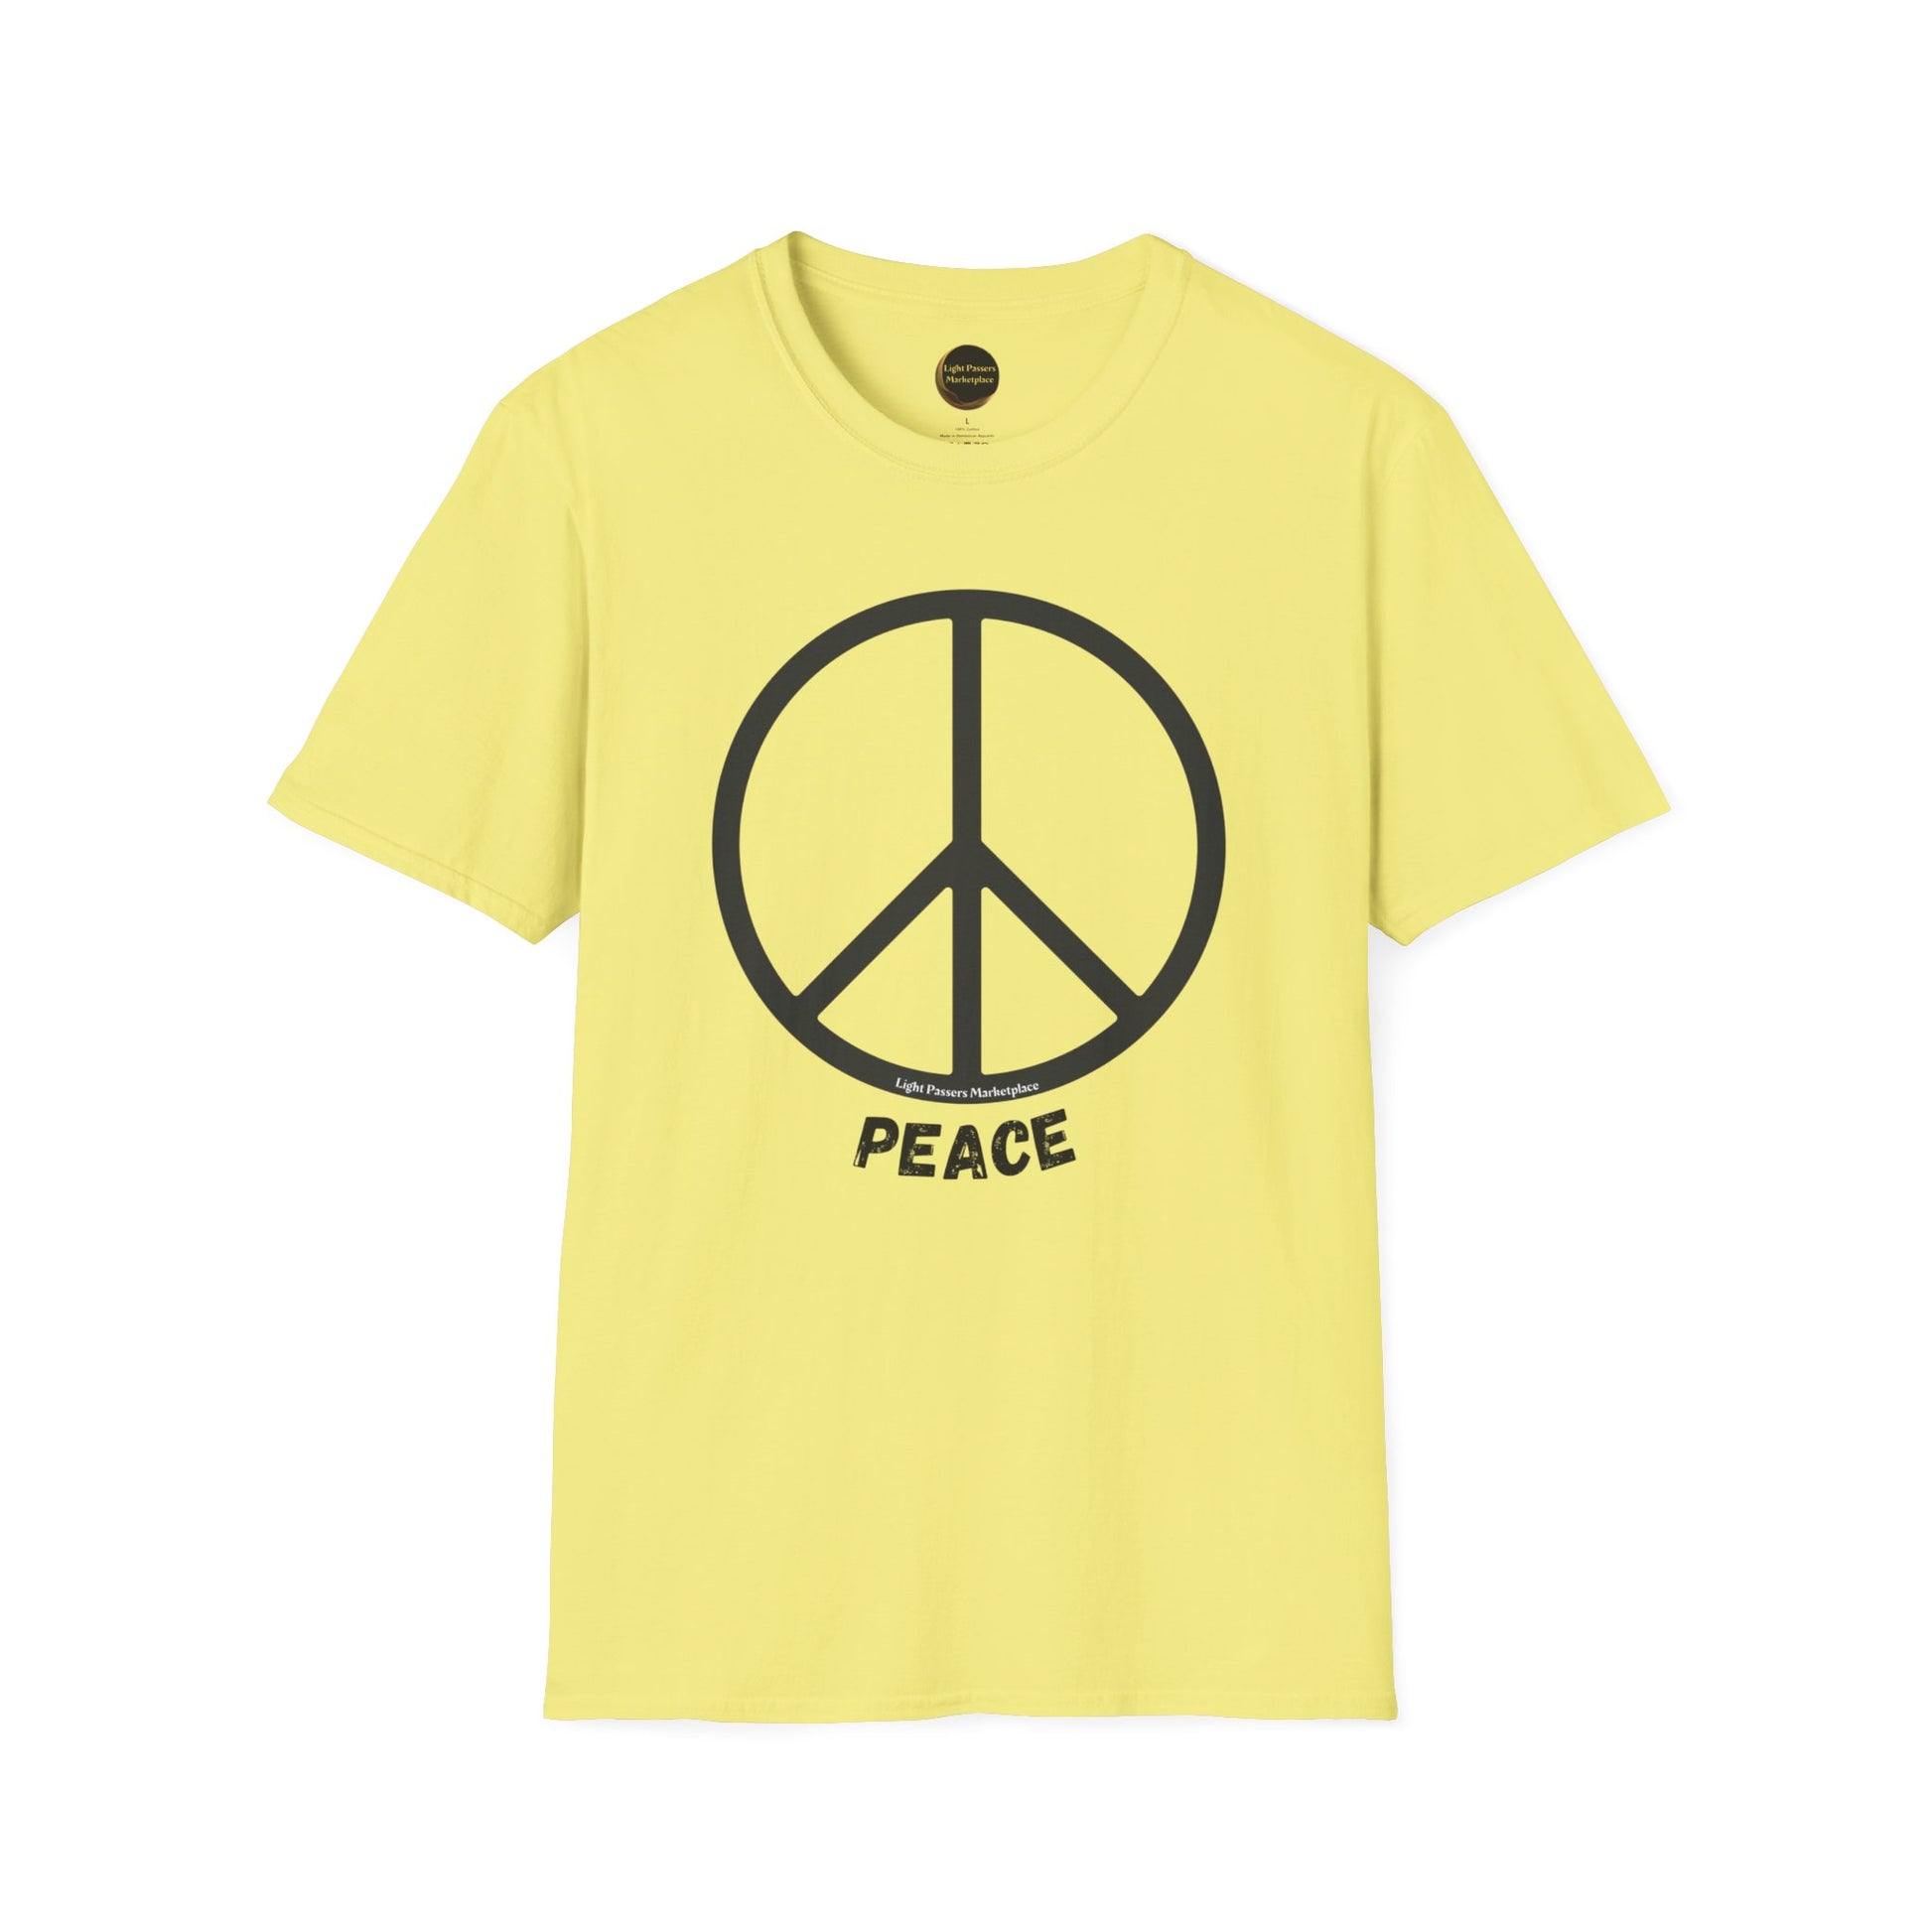 A soft yellow unisex t-shirt featuring a peace sign design, made of 100% cotton with twill tape shoulders for durability and a ribbed collar to prevent curling.